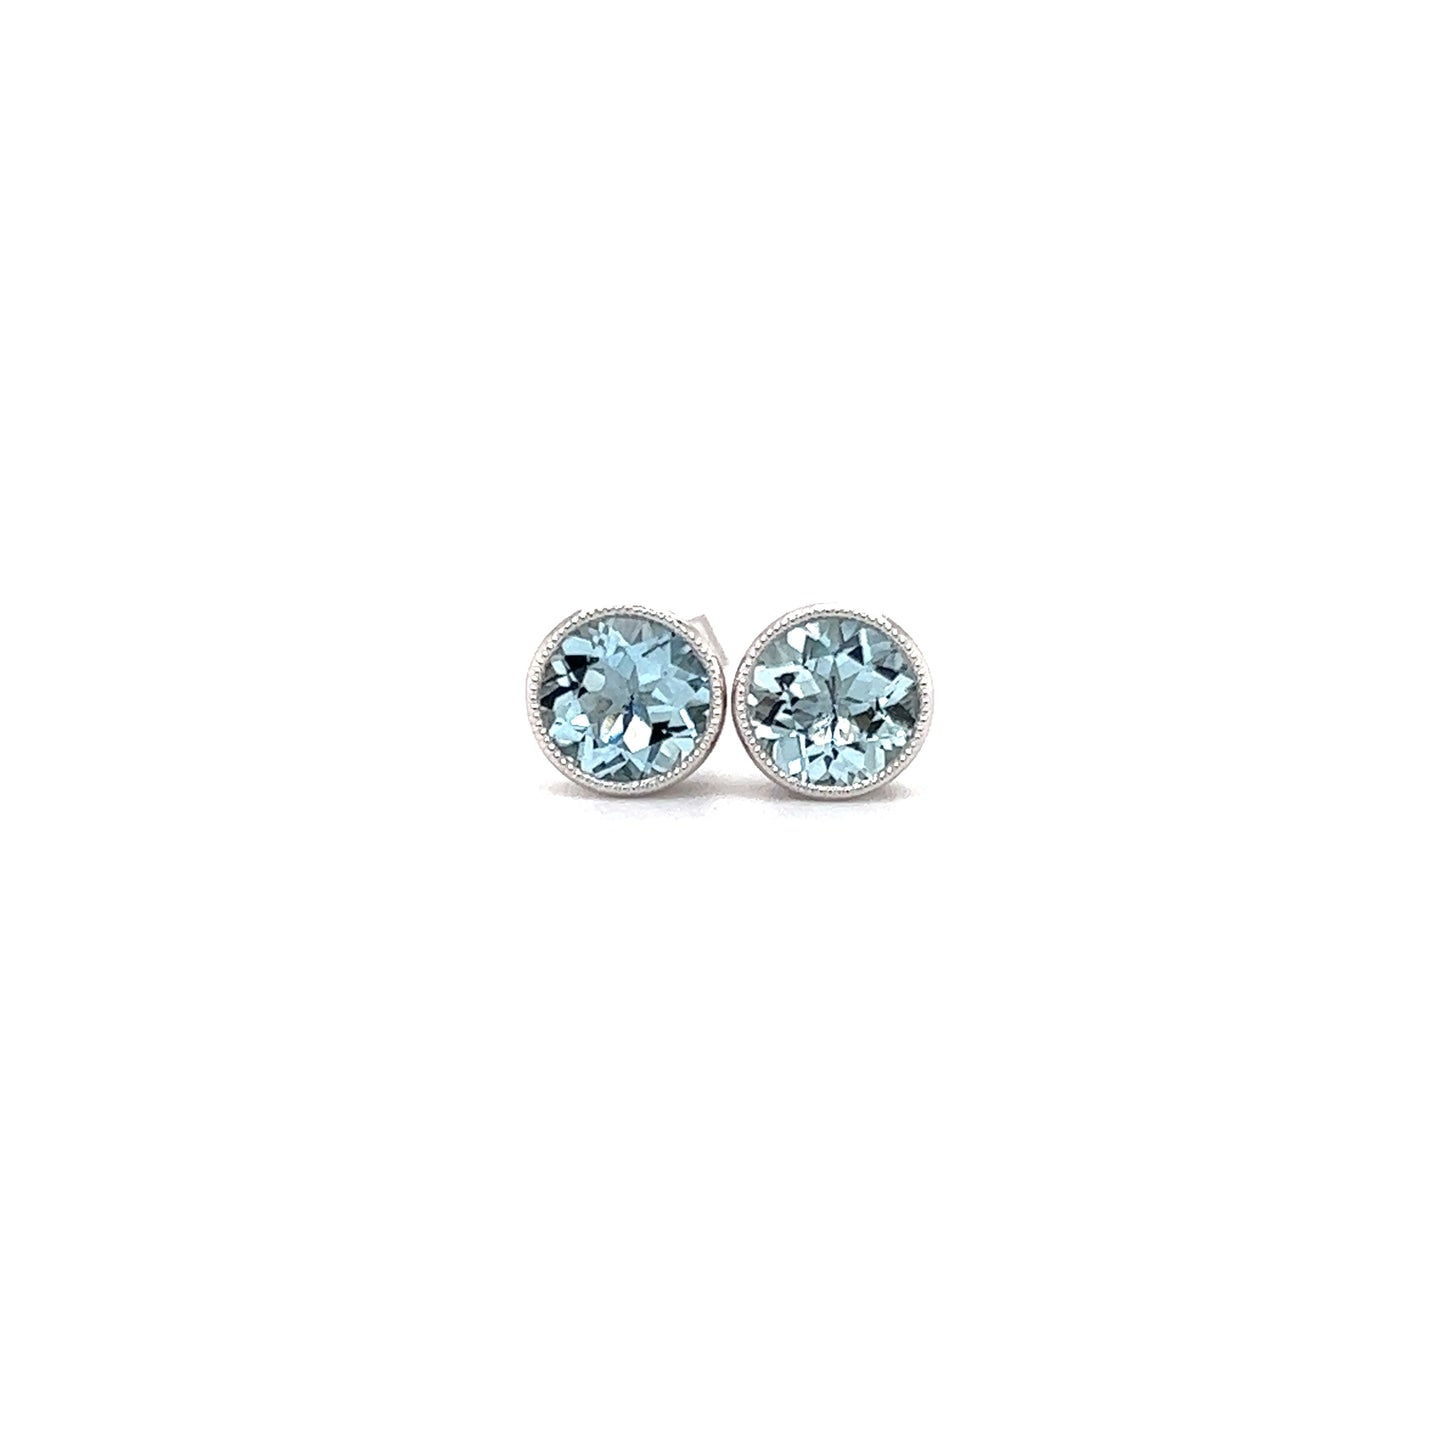 Aquamarine Stud Earrings with Filigree and Milgrain Details in 14K White Gold Front View